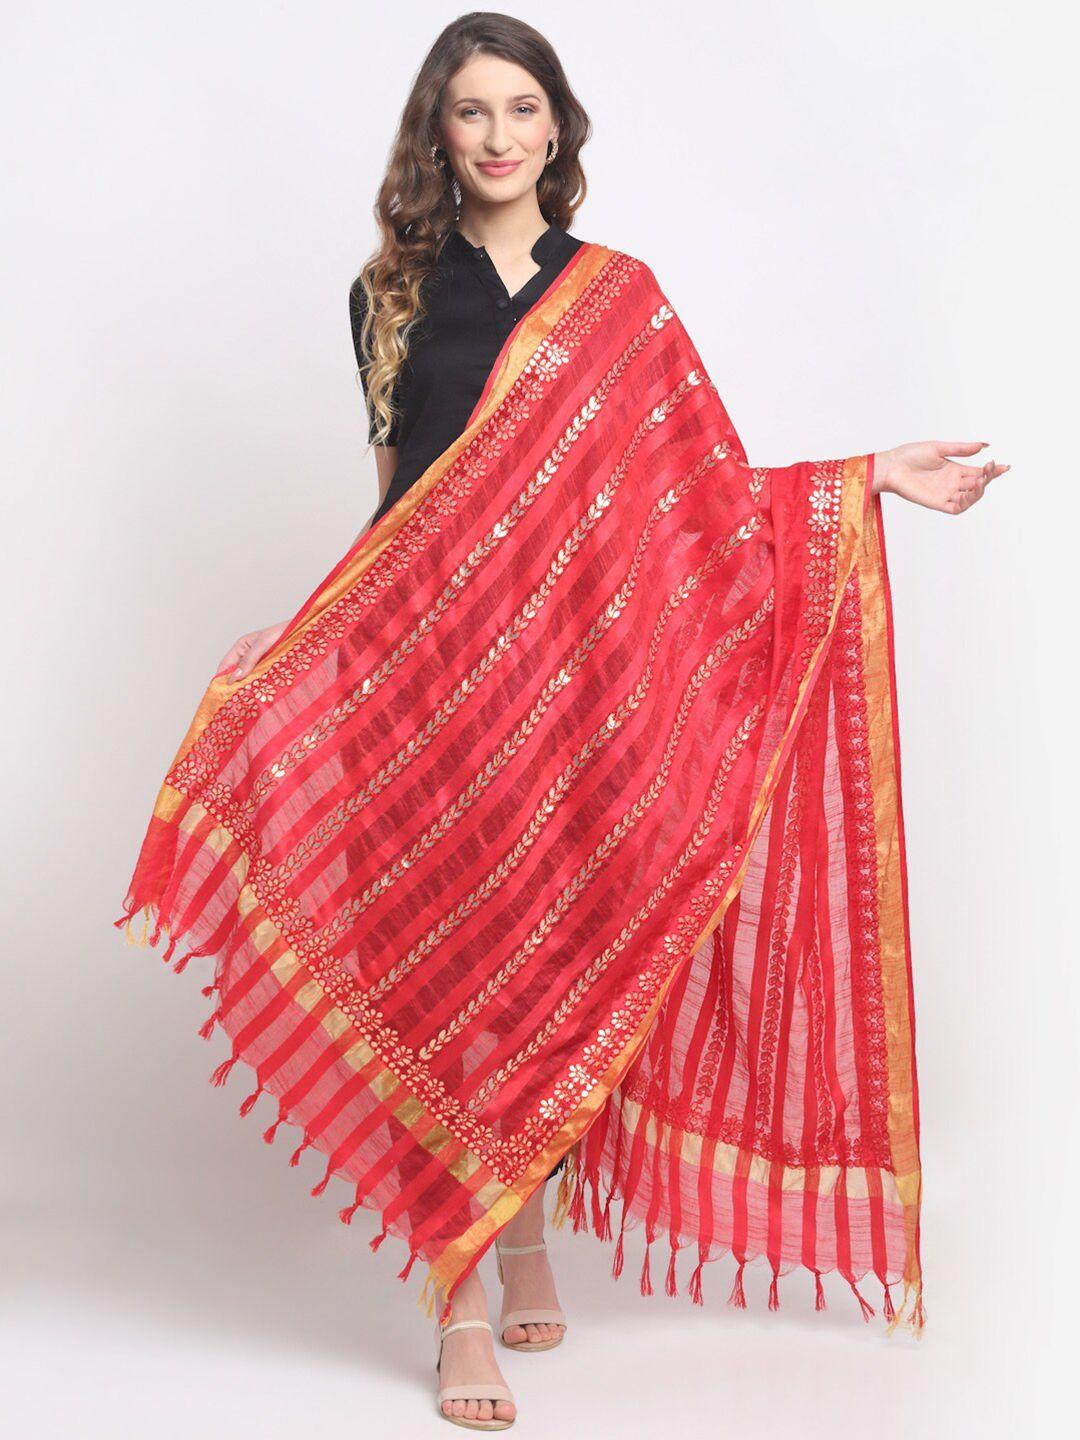 soundarya red & gold-toned embroidered dupatta with gotta patti